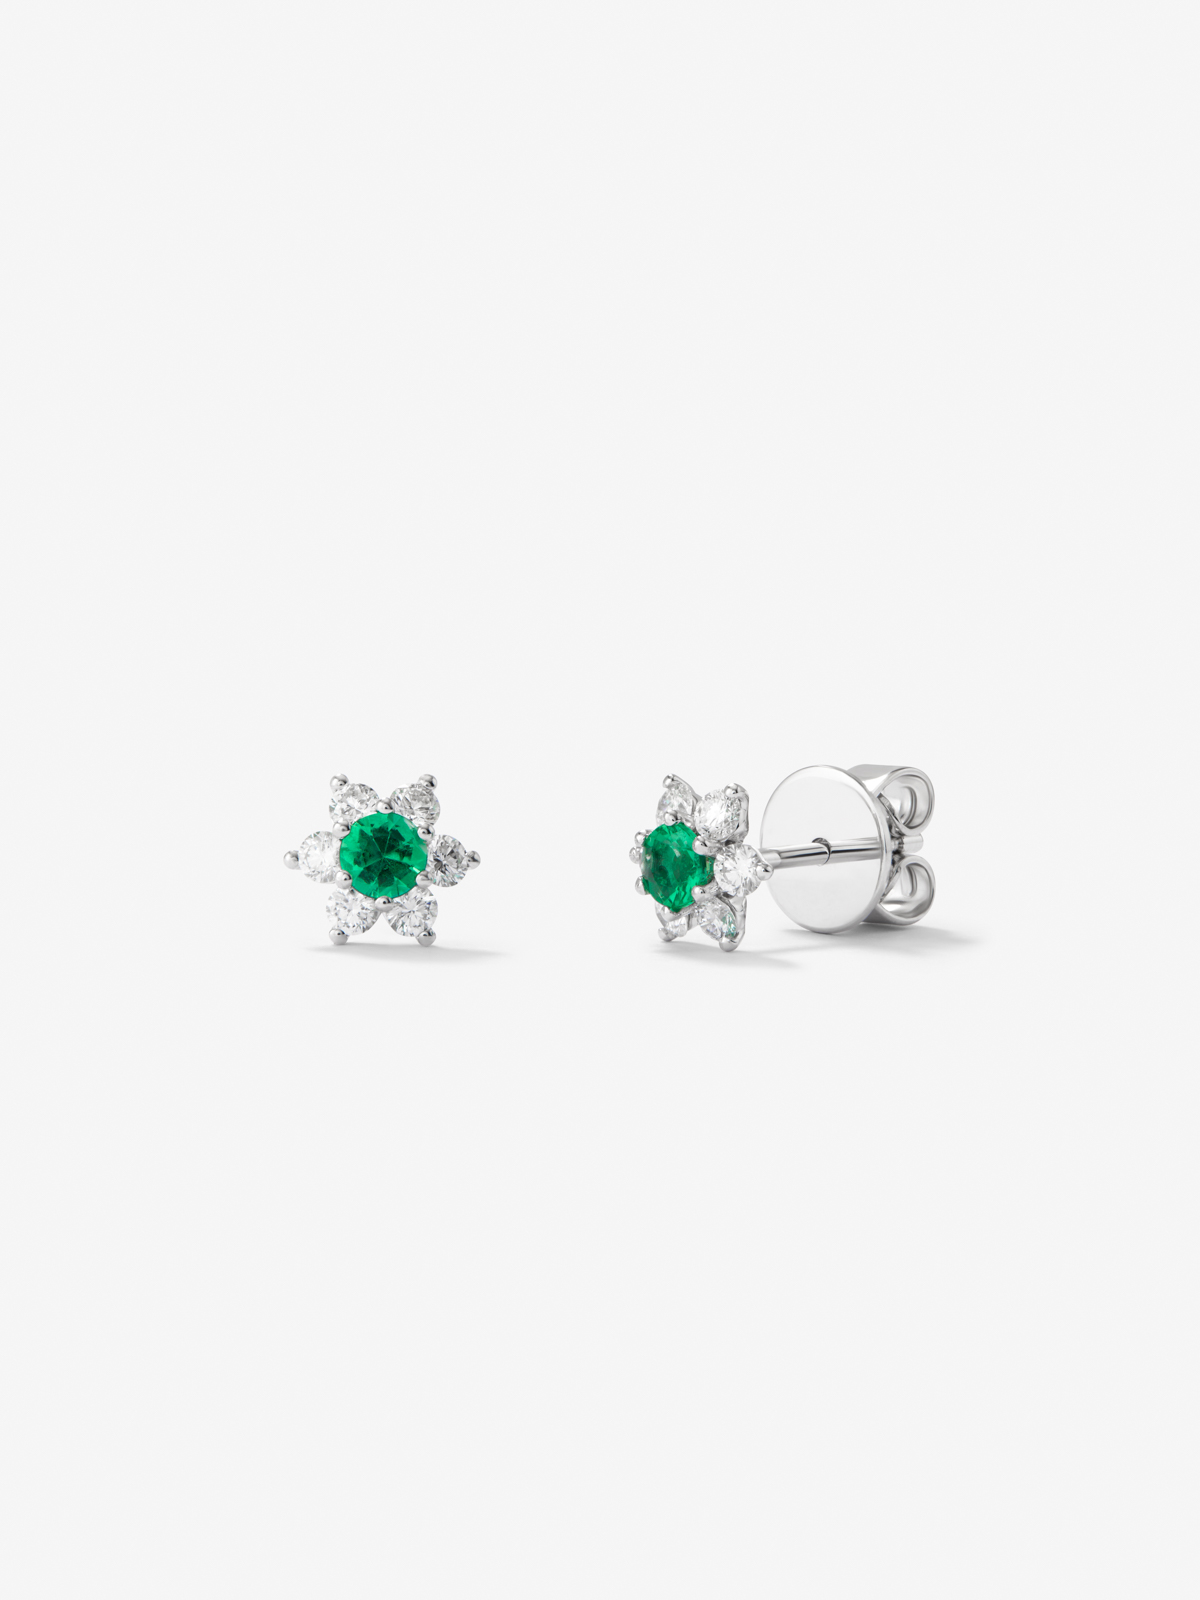 18K white gold earrings with green emeralds in bright size of 0.19 cts and white diamonds in 0.3 cts bright size